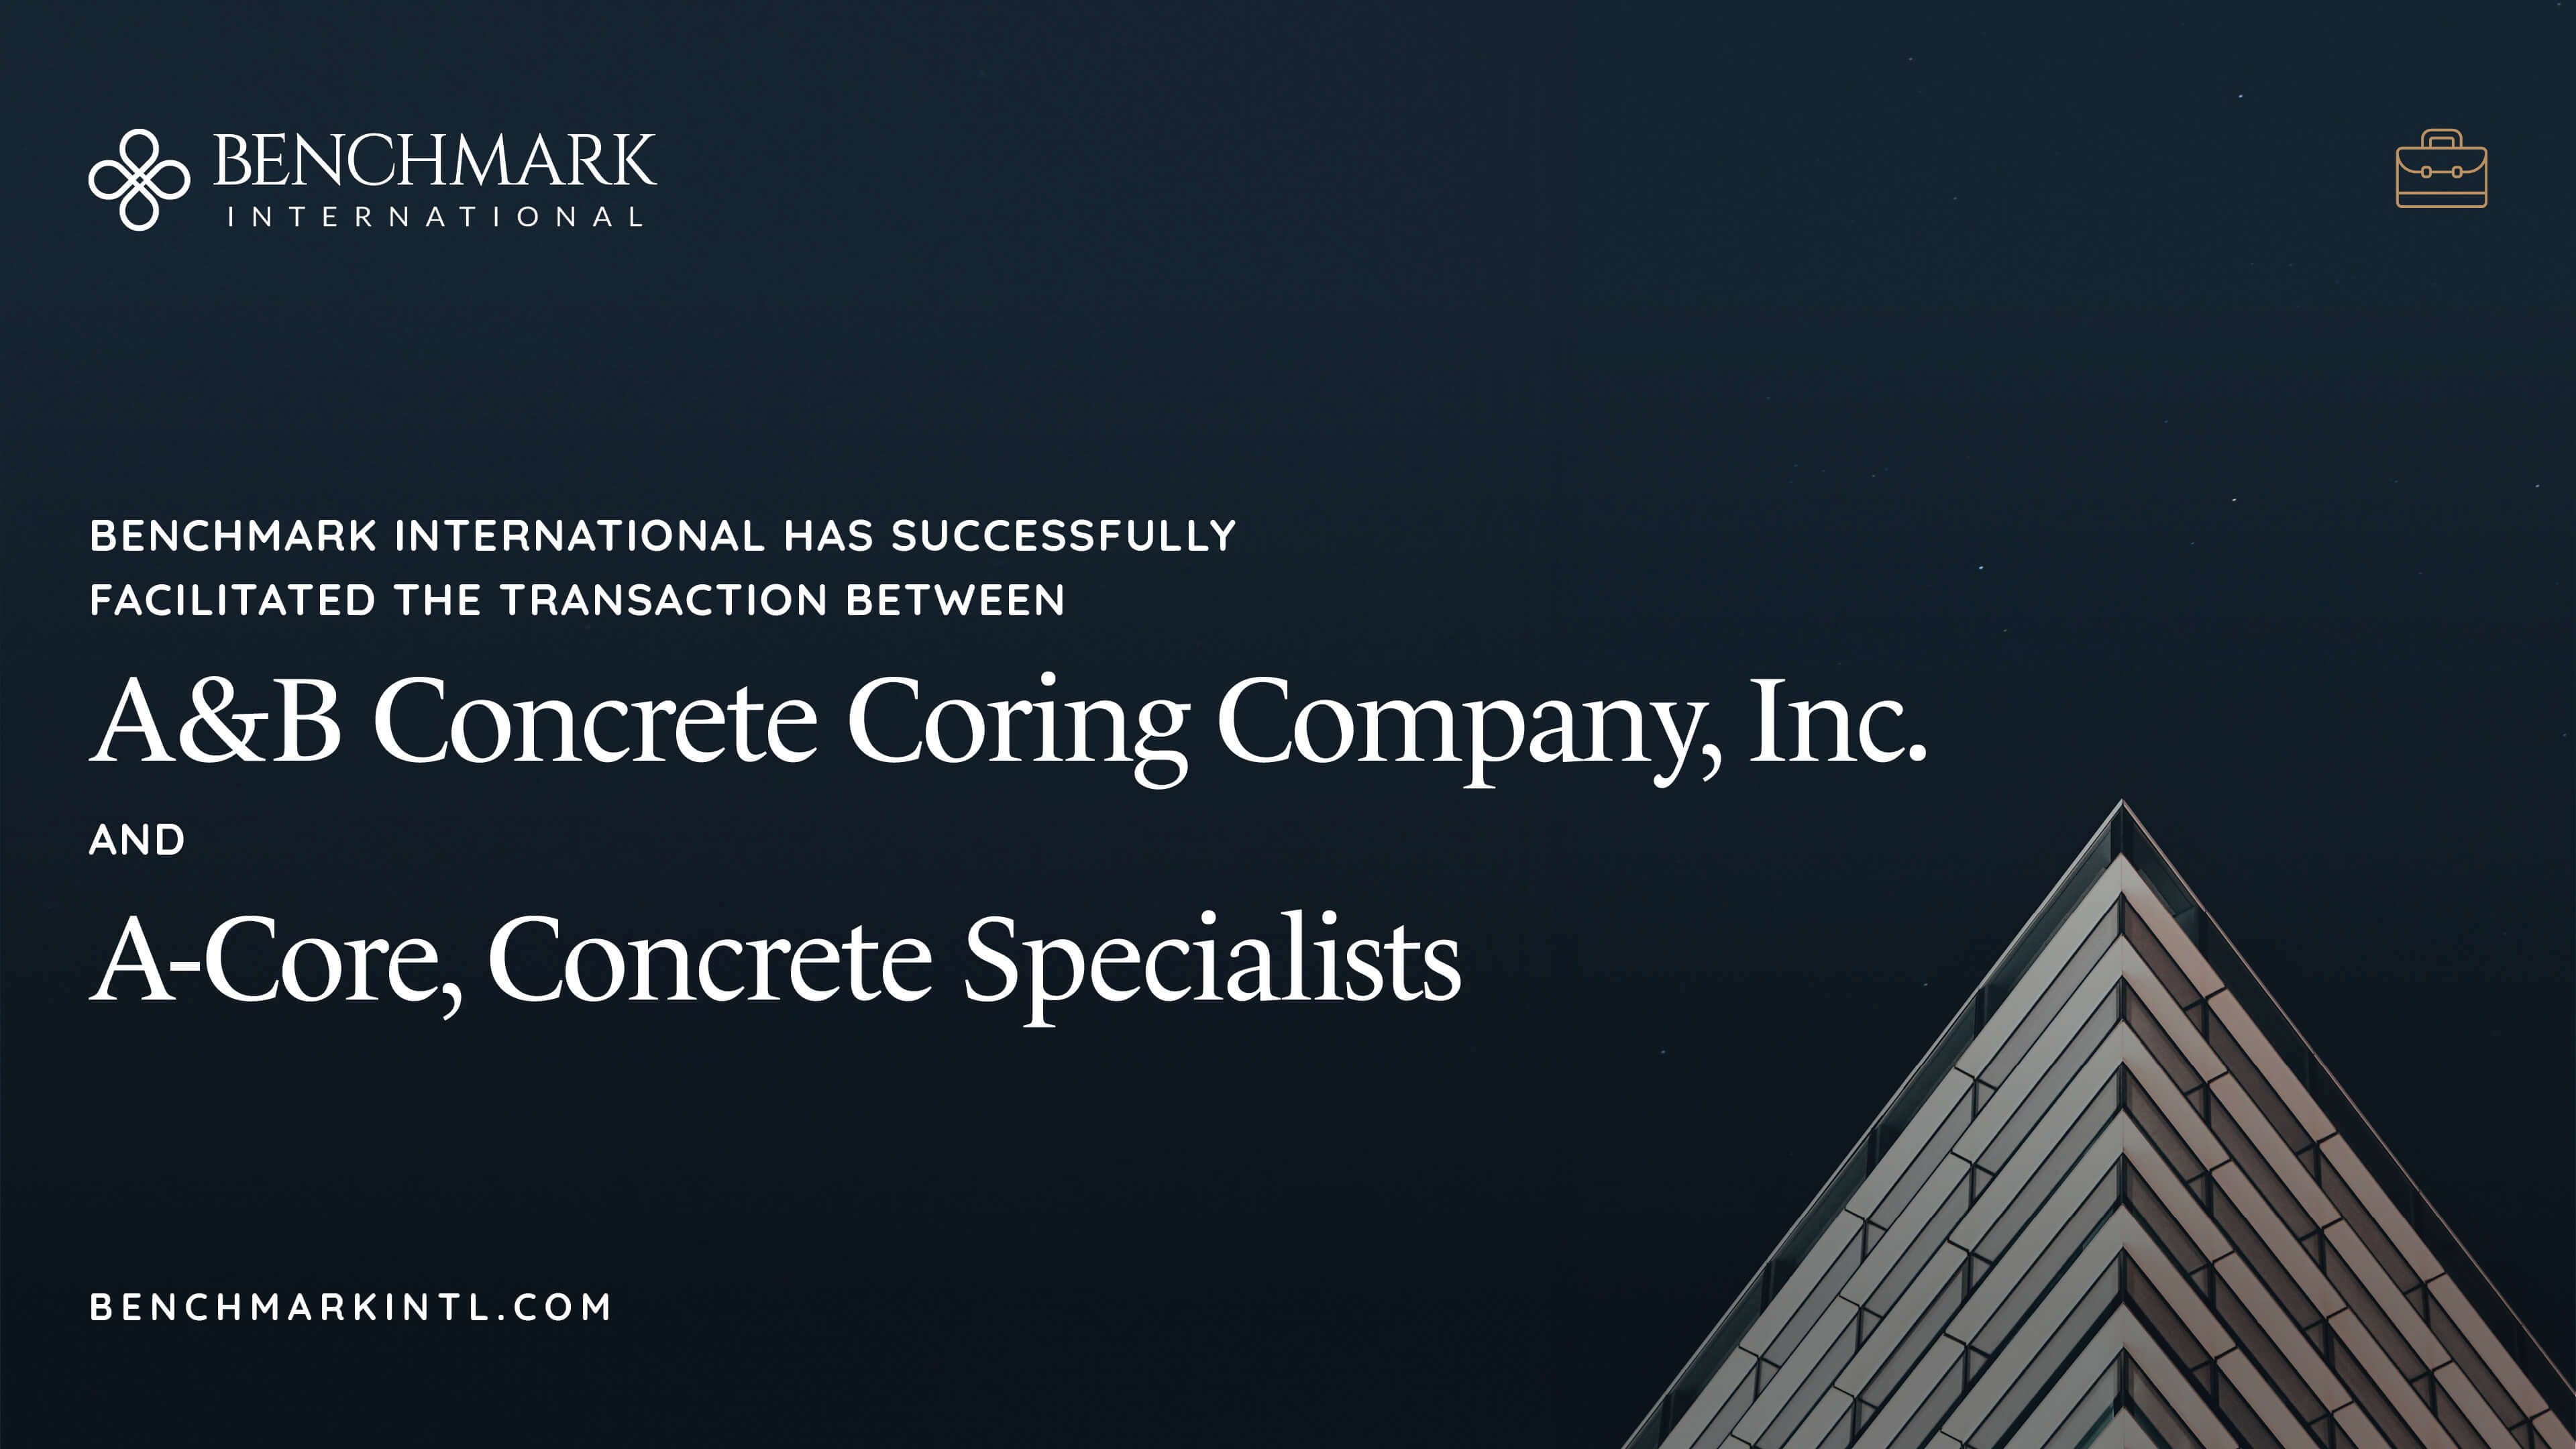 Benchmark International Has Successfully Facilitated The Transaction Between A&amp;B Concrete Coring Company Inc. And A-Core, Concrete Specialists